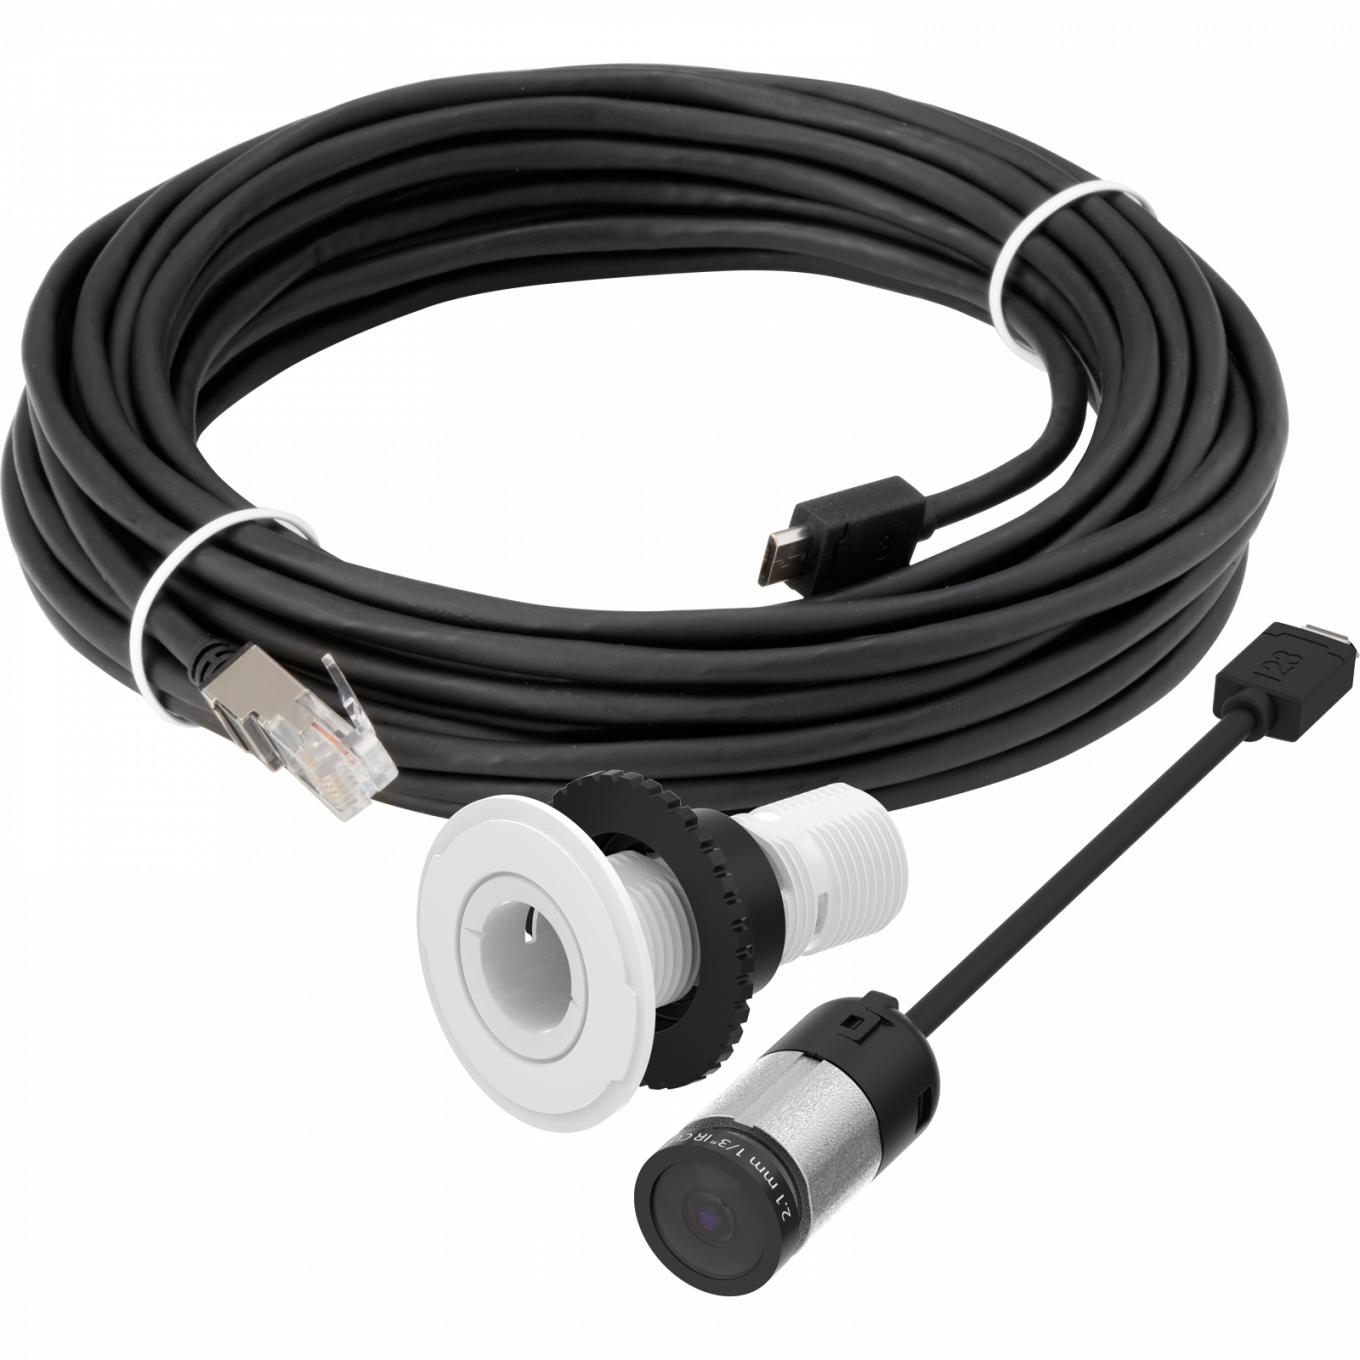 AXIS F1004 Sensor unit and cable